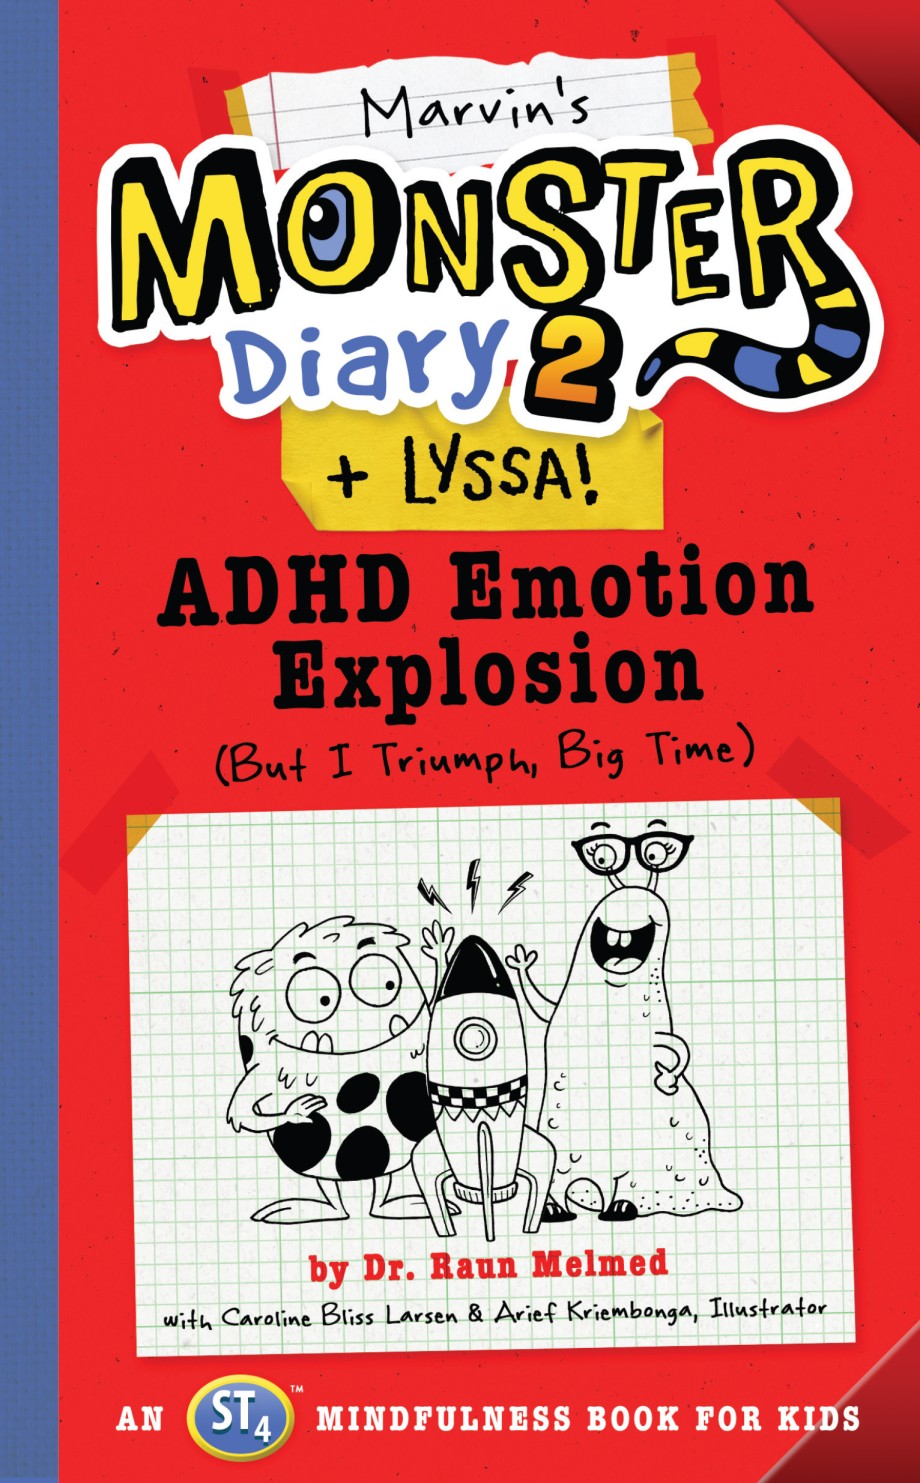 Marvin's Monster Diary 2 (+ Lyssa) ADHD Emotion Explosion (But I Triumph, Big Time), An ST4 Mindfulness Book for Kids